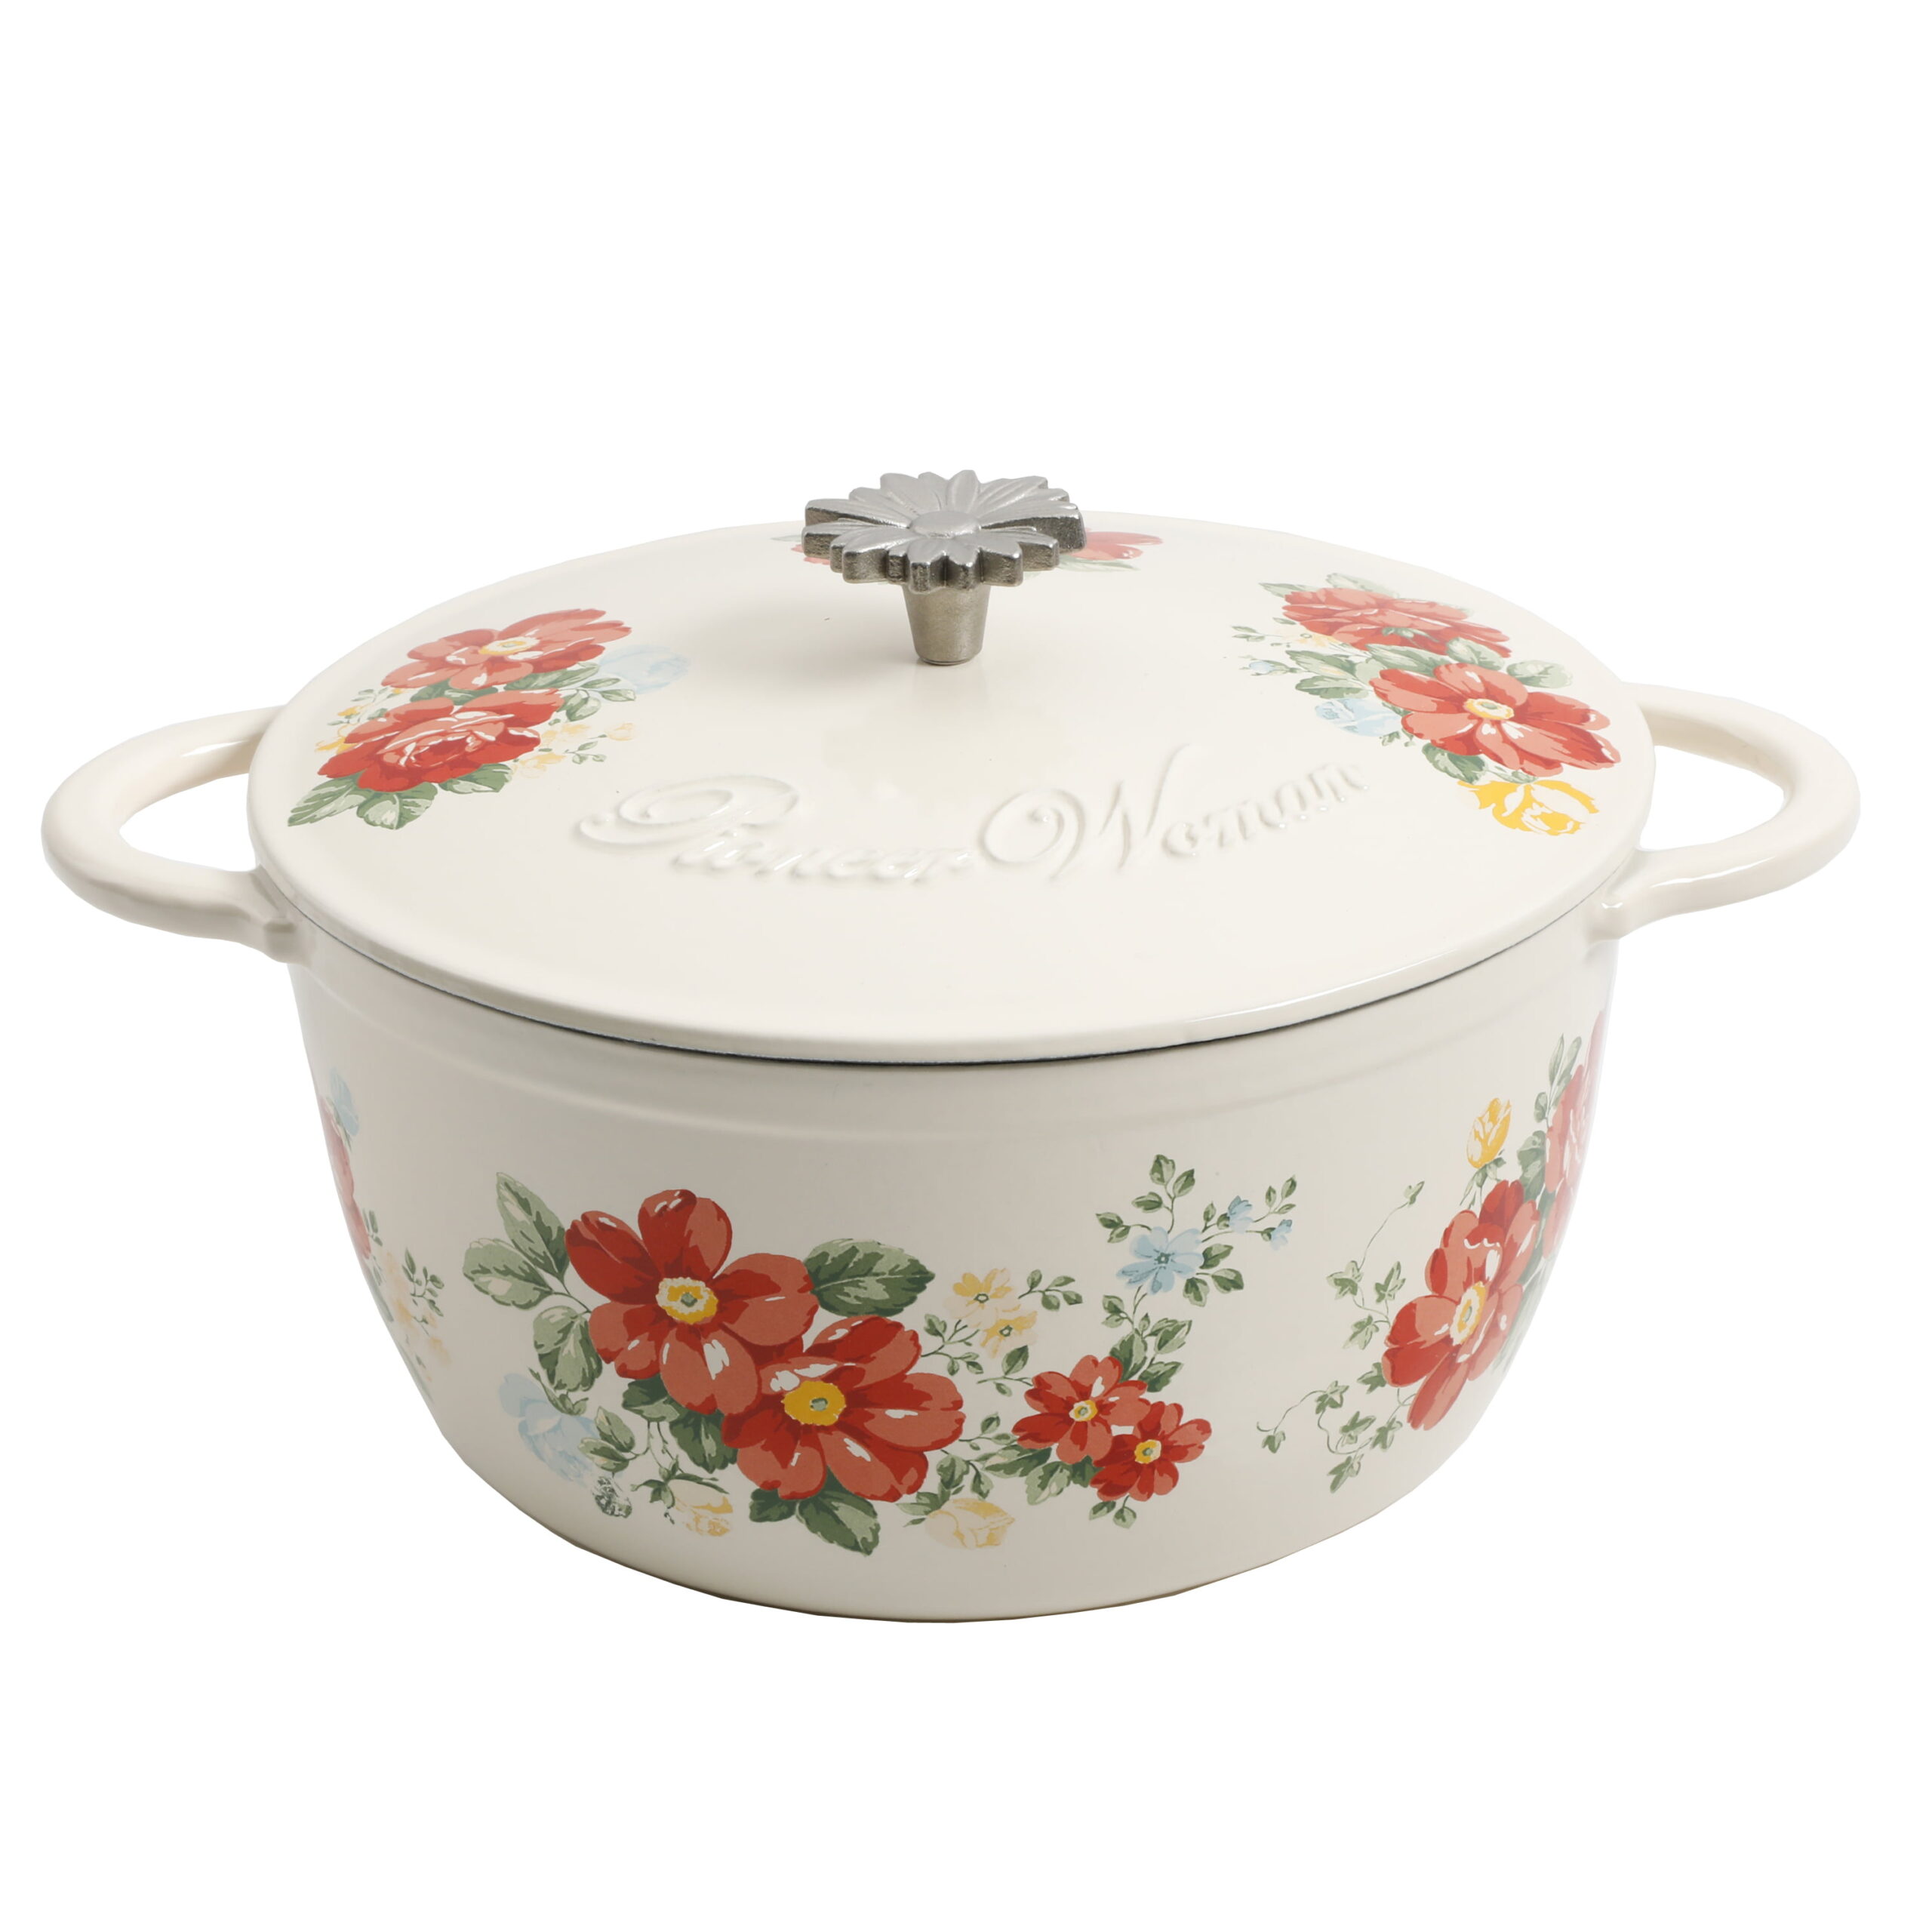 The Pioneer Woman Floral Enamel on Cast Iron 2-Quart Dutch Oven with Lid,  Linen